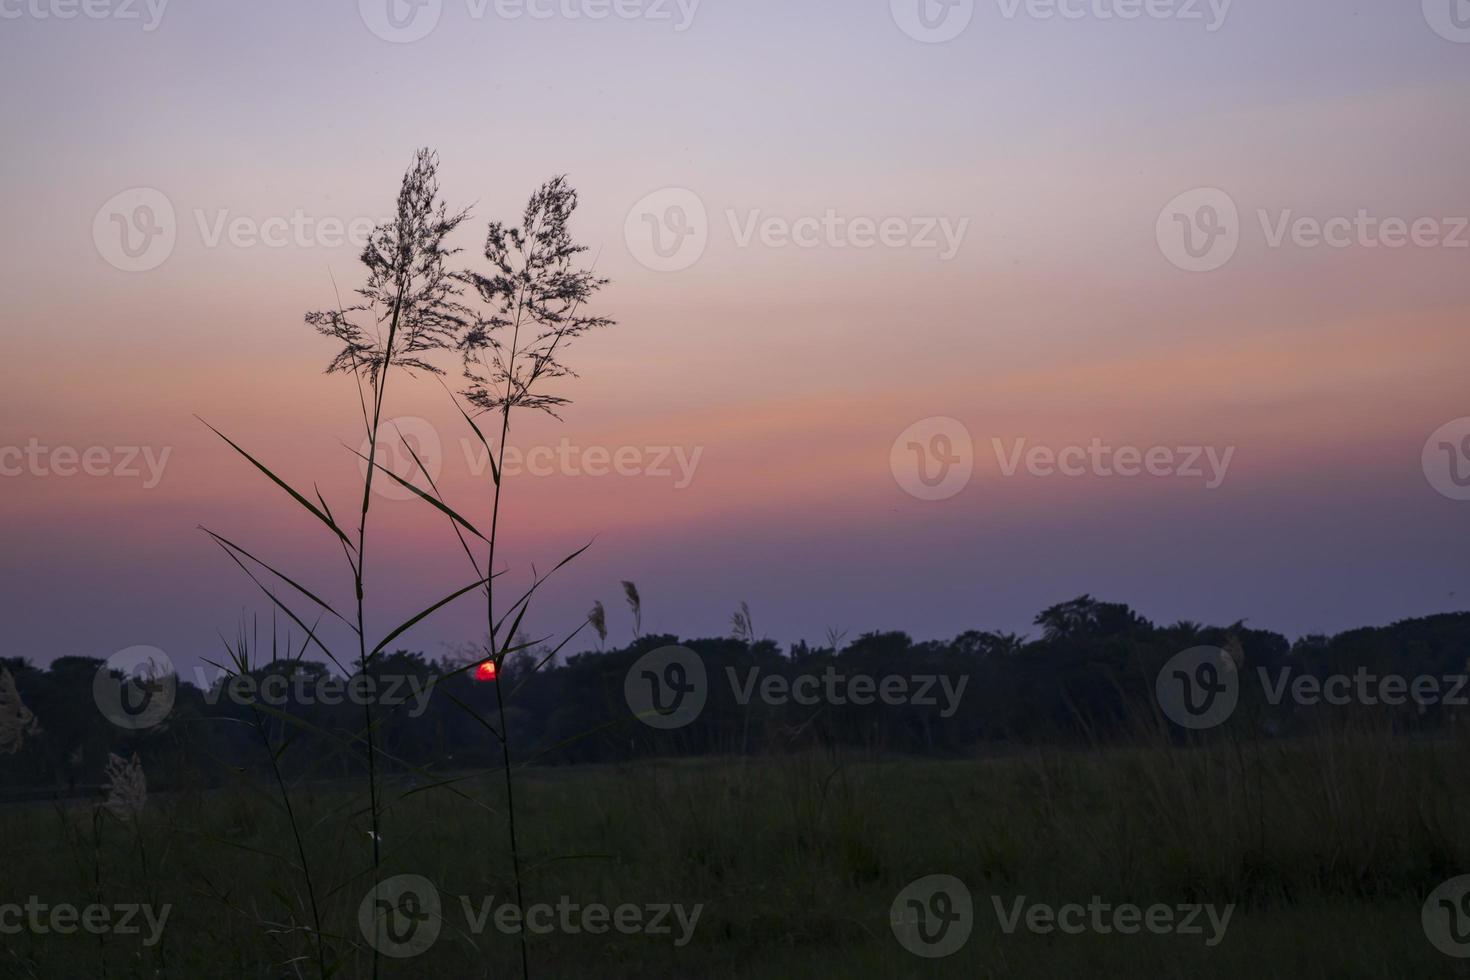 Sunset over the Kans grass or Saccharum spontaneum flowers landscape view photo